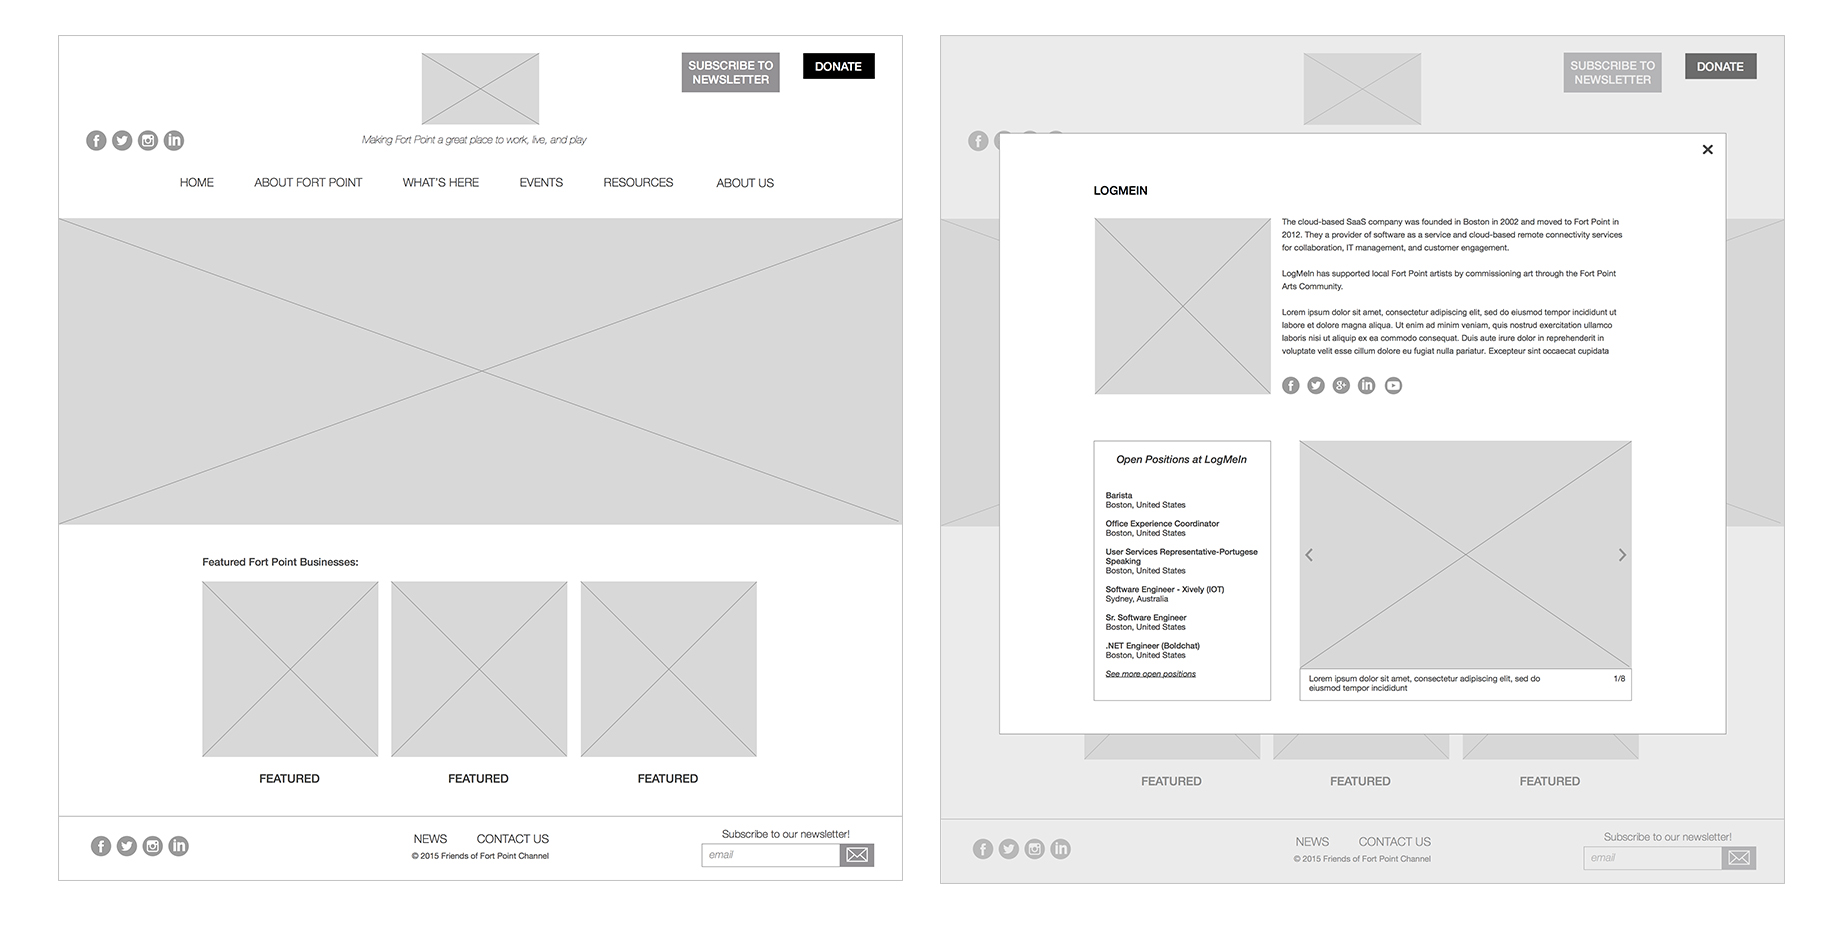 Homepage (left), Featured business modal (right).